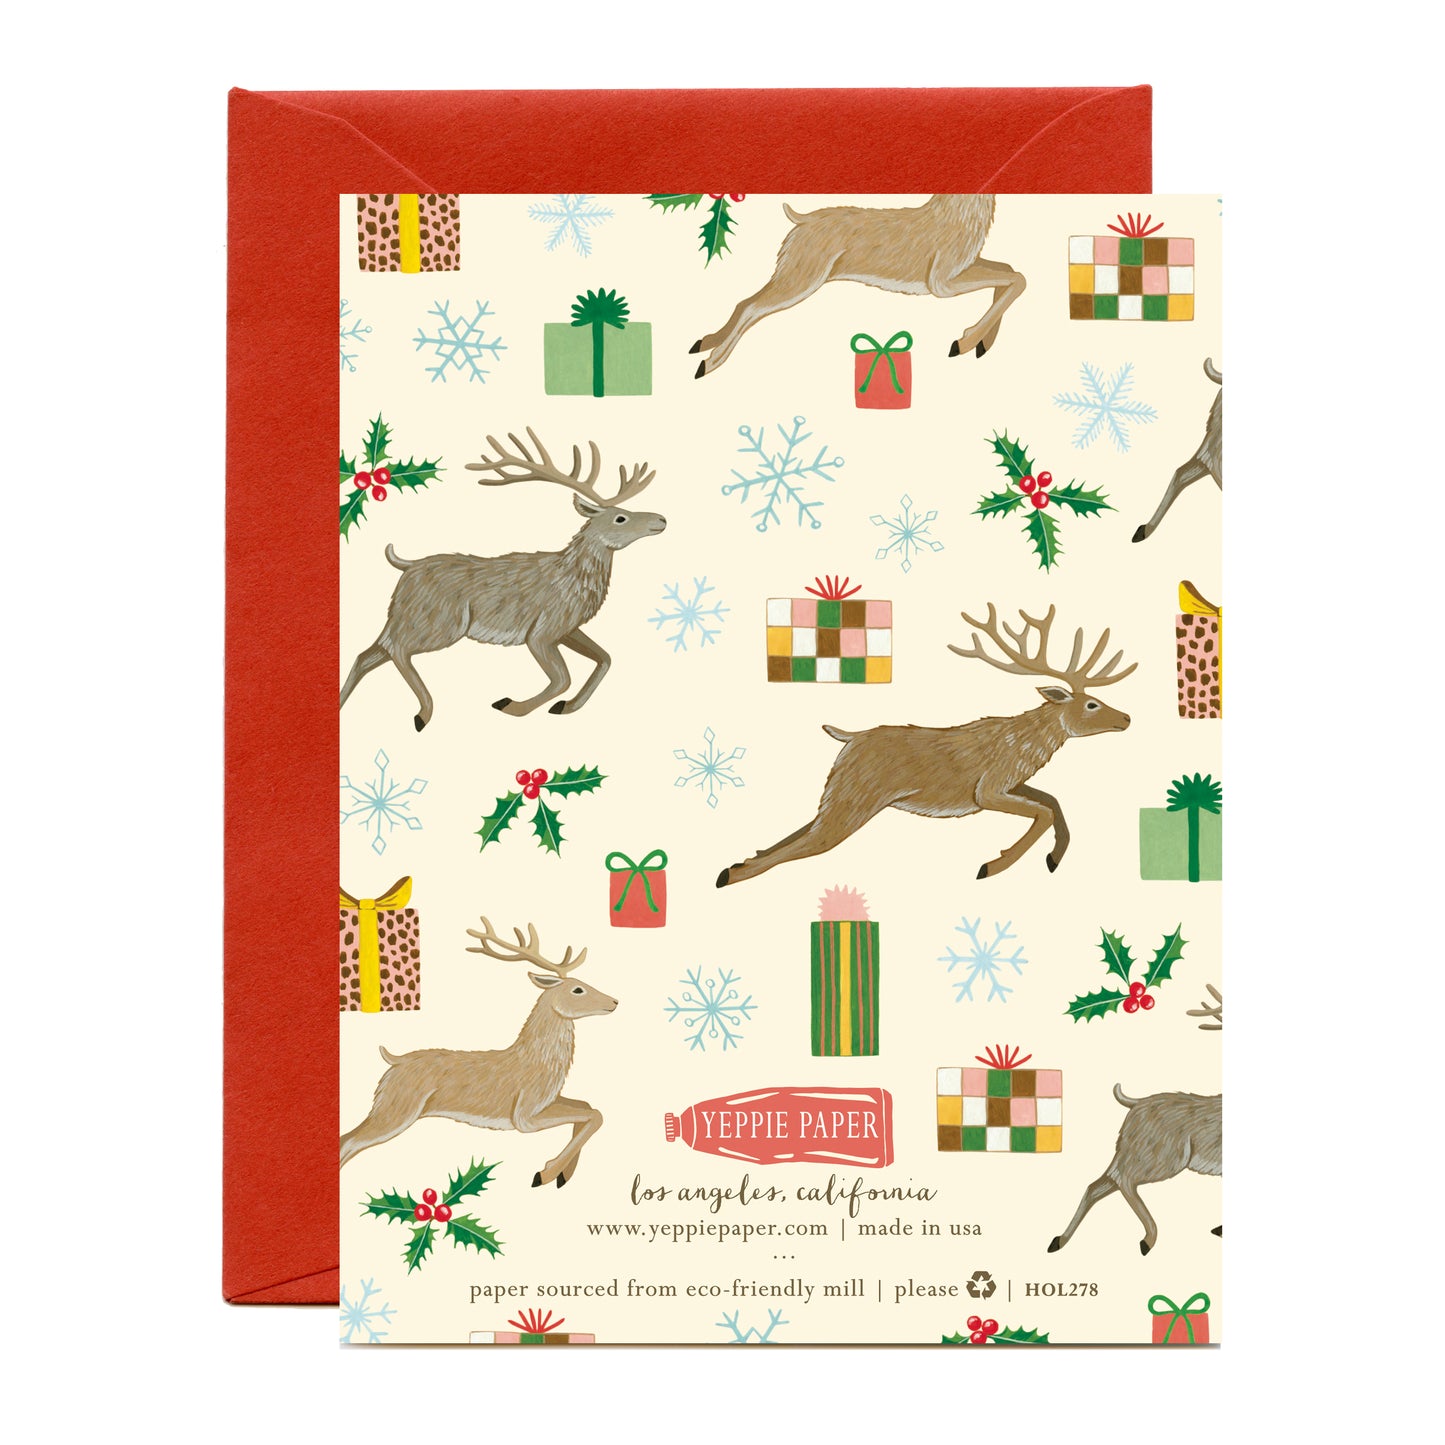 FLYING REINDEER - HOLIDAY GREETING CARDS, BOXED SET OF 8